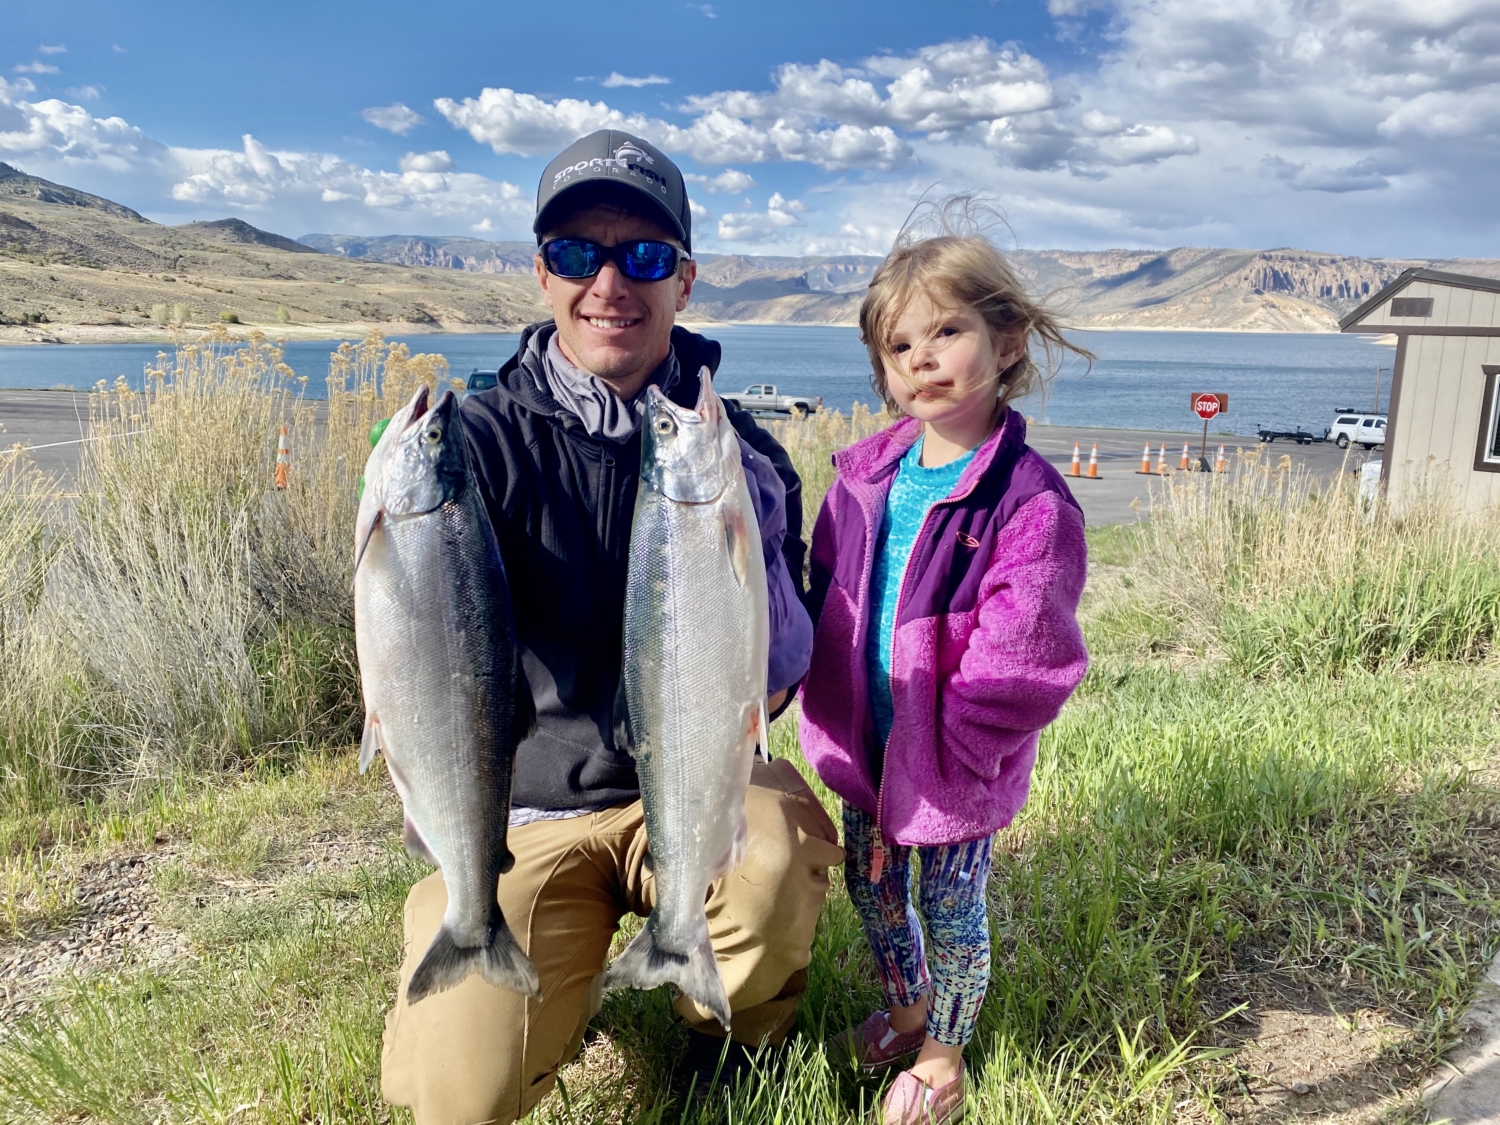 Blue Mesa Fishing Report the lake is open to boating and Gunnison